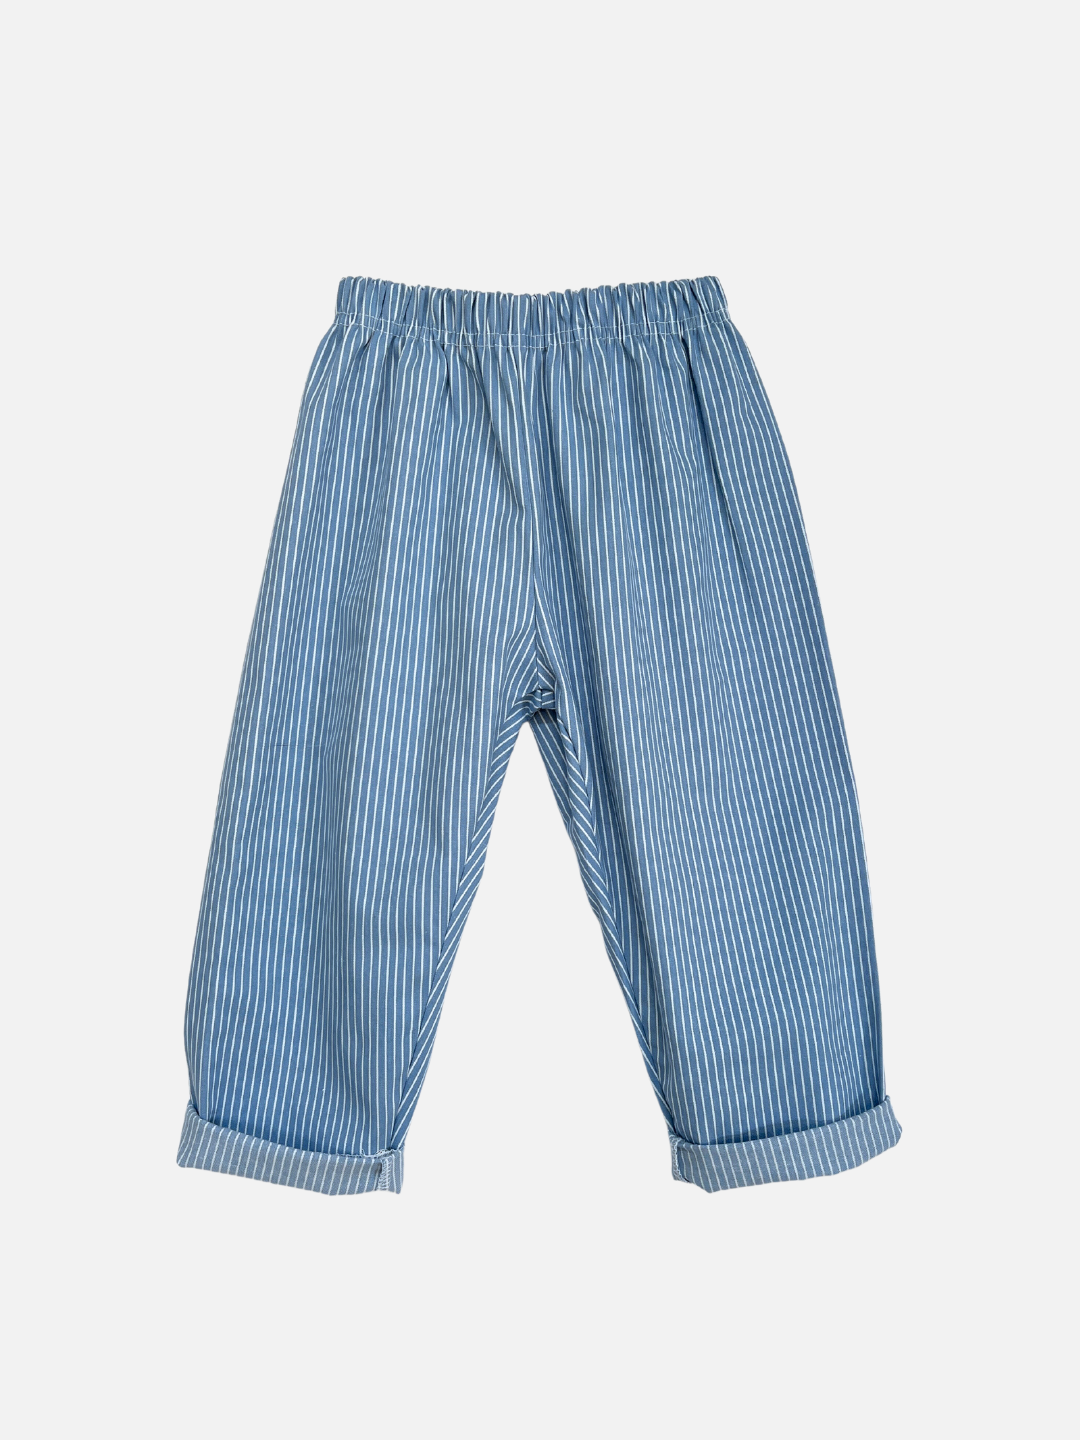 Front view of kids light blue pants with narrow white vertical stripes, cuffed at the ankle.